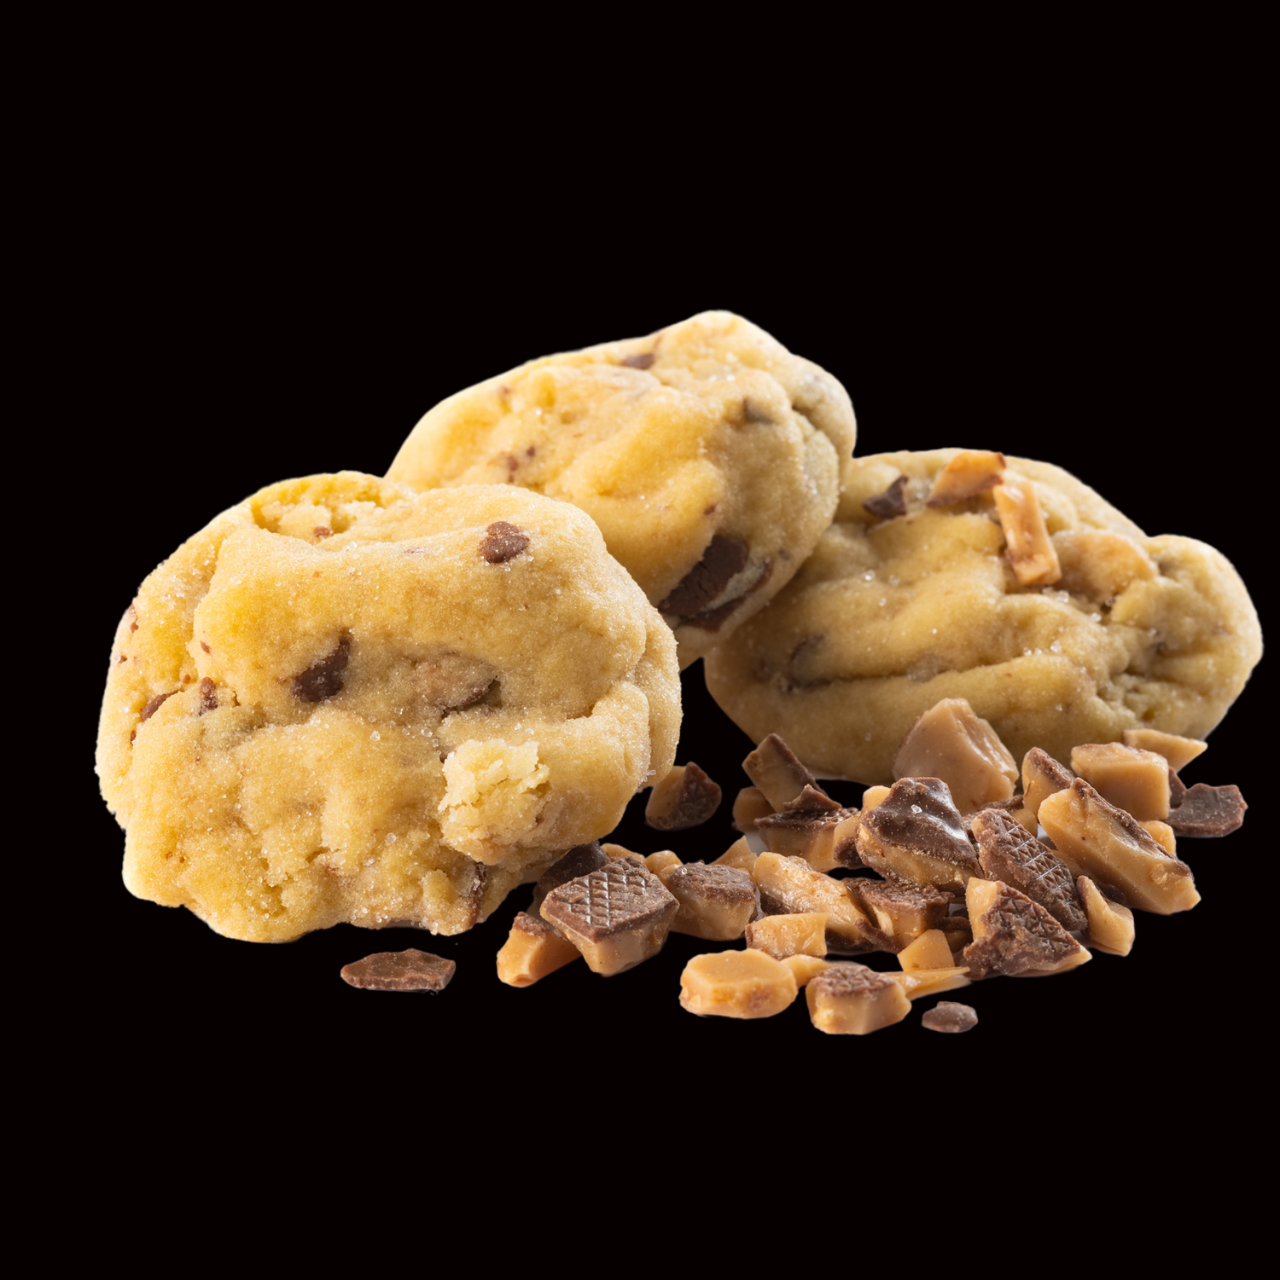 Our gourmet, handcrafted Sugared Almond Toffee cookie. | Monica's Gourmet Cookies